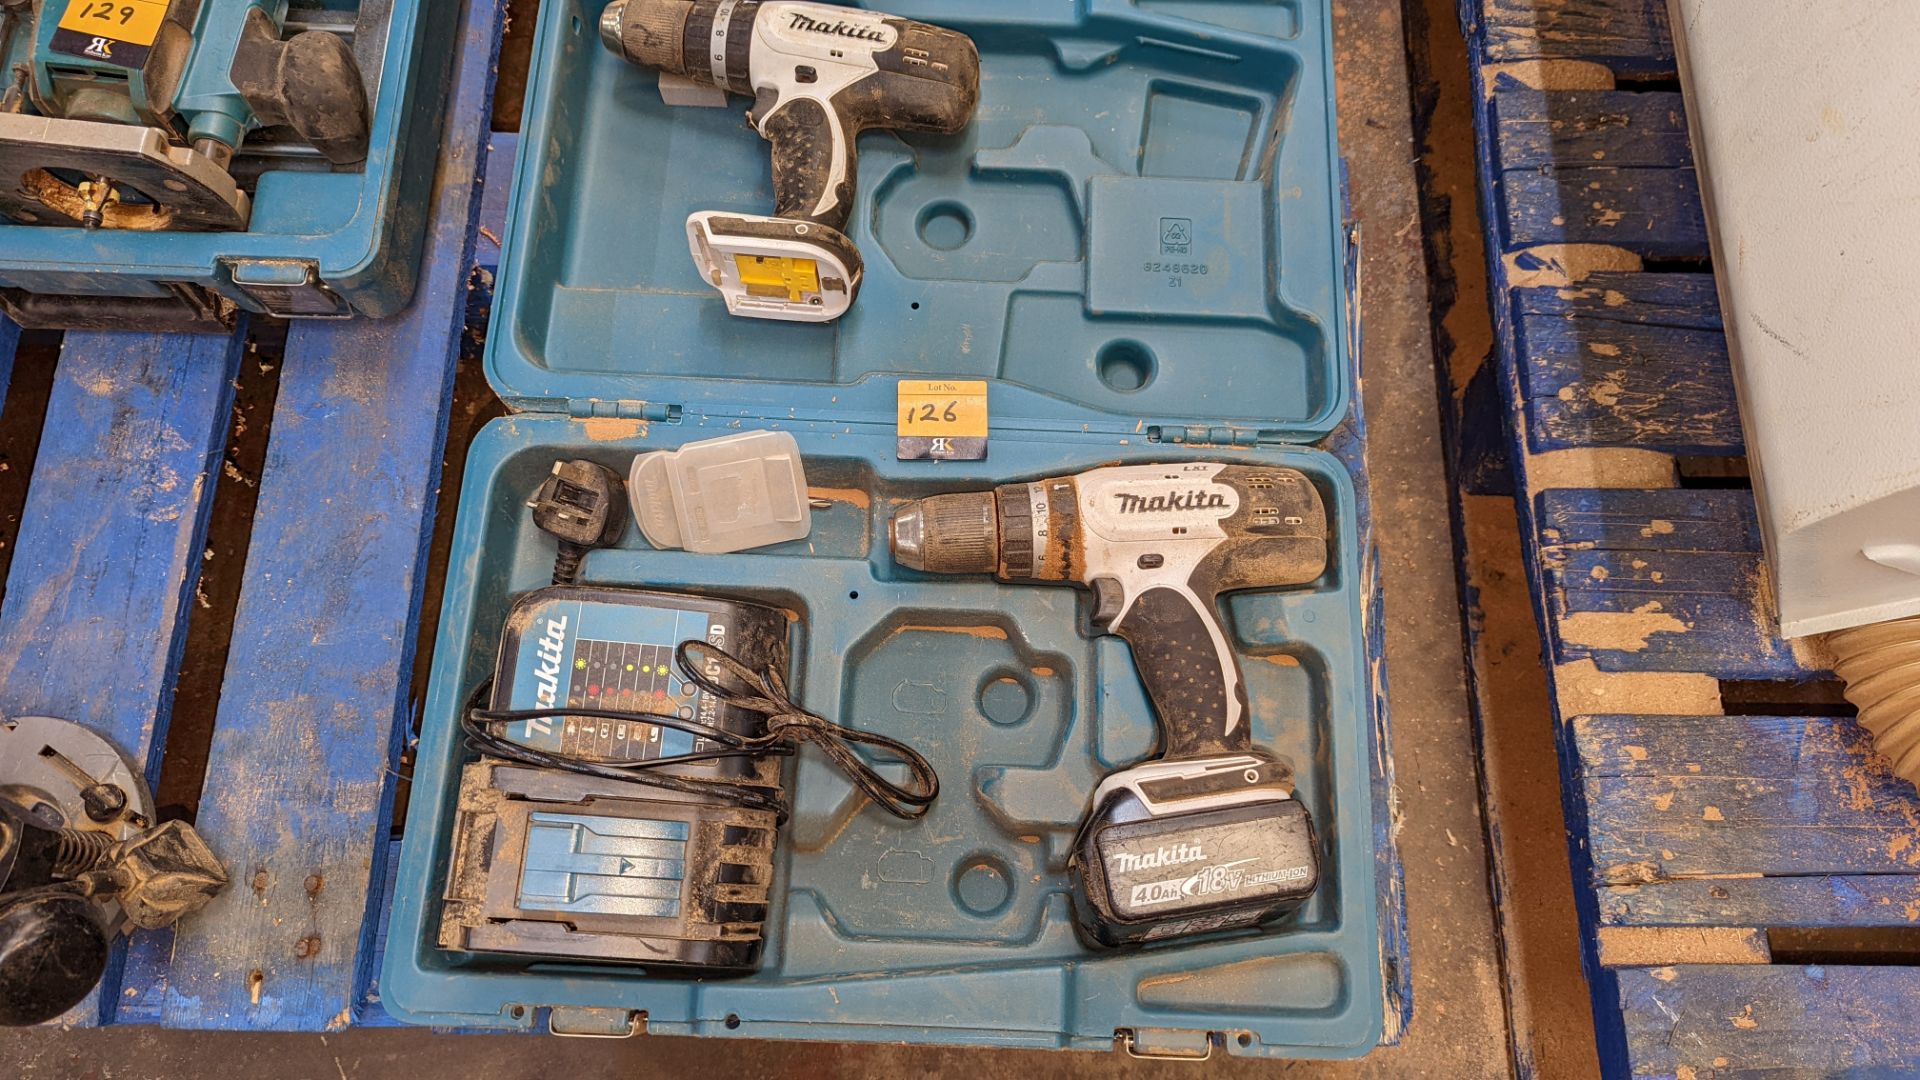 Cordless Makita power tool lot comprising 2 off DHP453 drills, 1 off 18v battery, 1 off DC18SD charg - Image 2 of 8